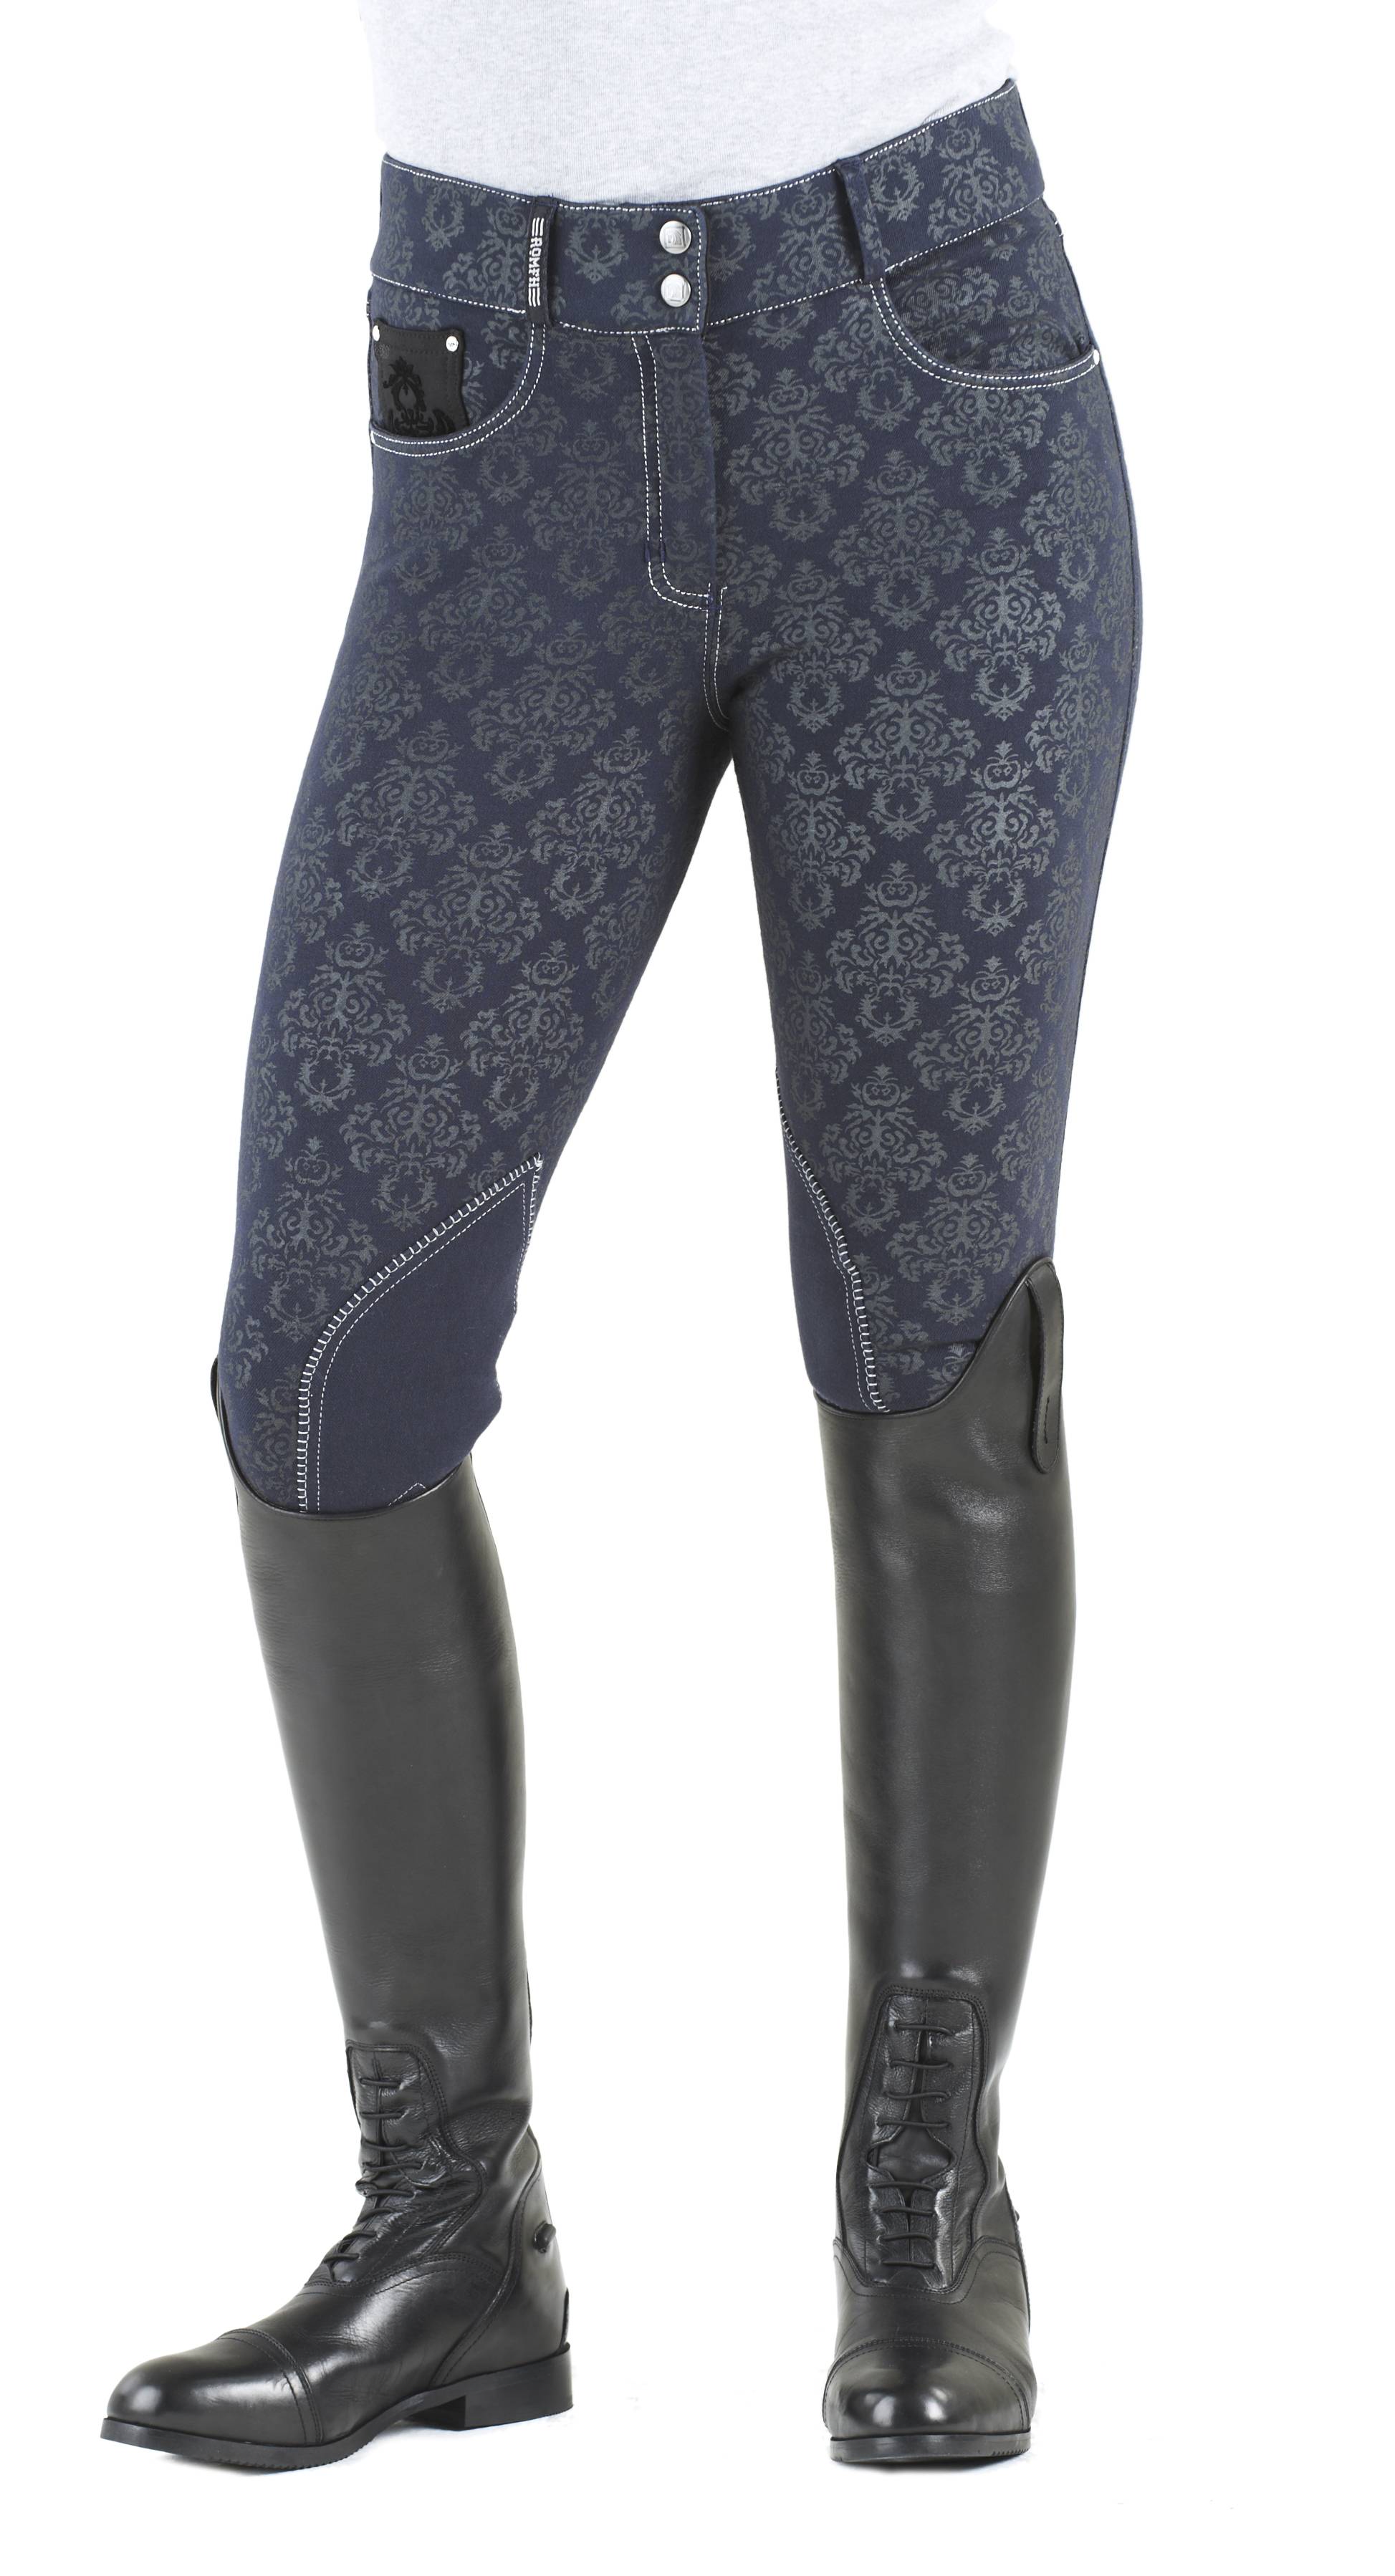 Sit Tight N Warm Knee Patch Breeches